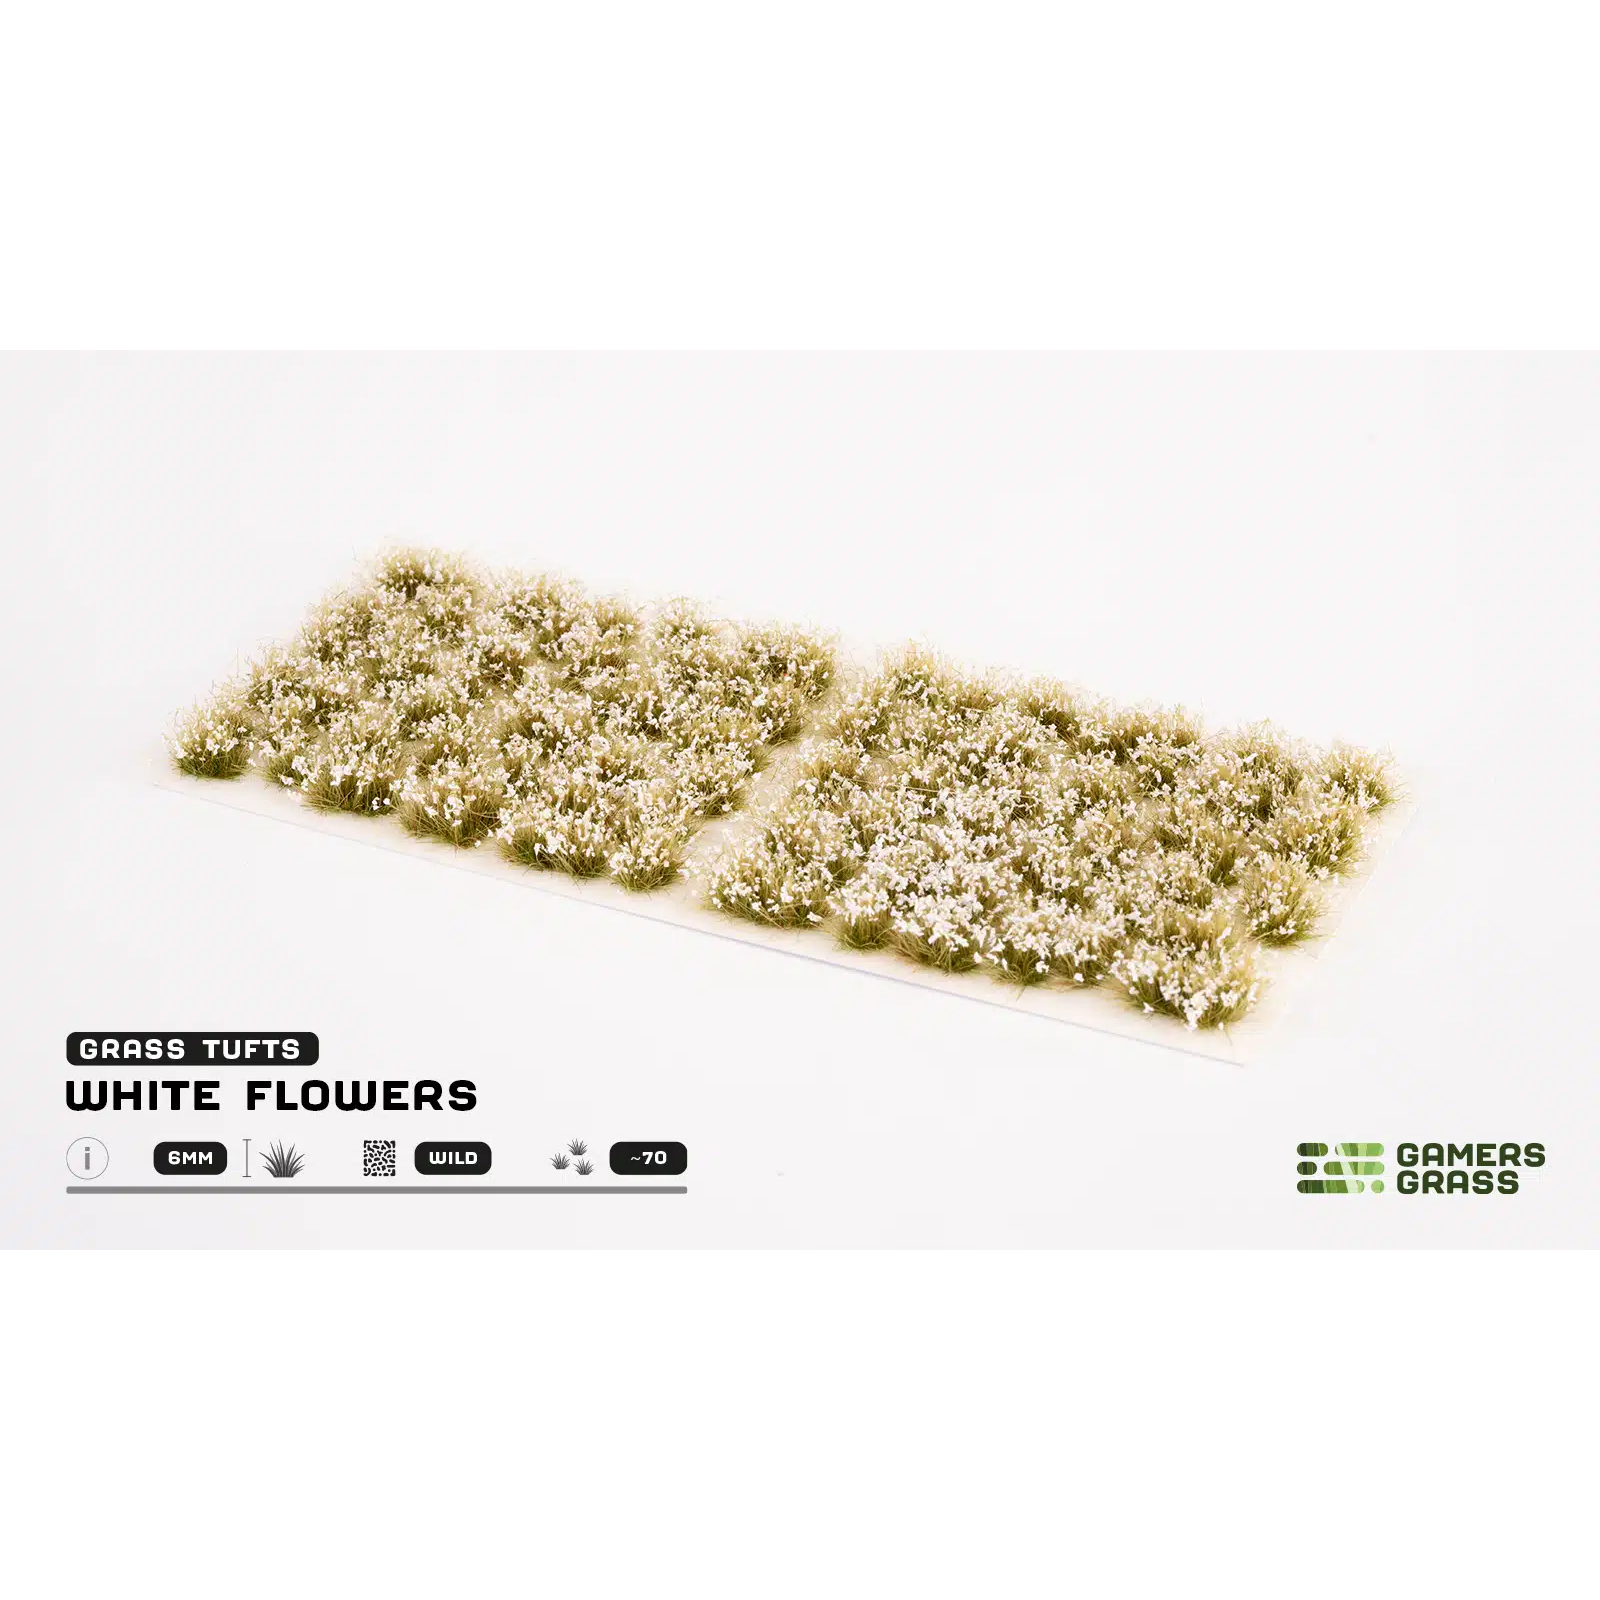 Gamers Grass White Fowlers - Wild